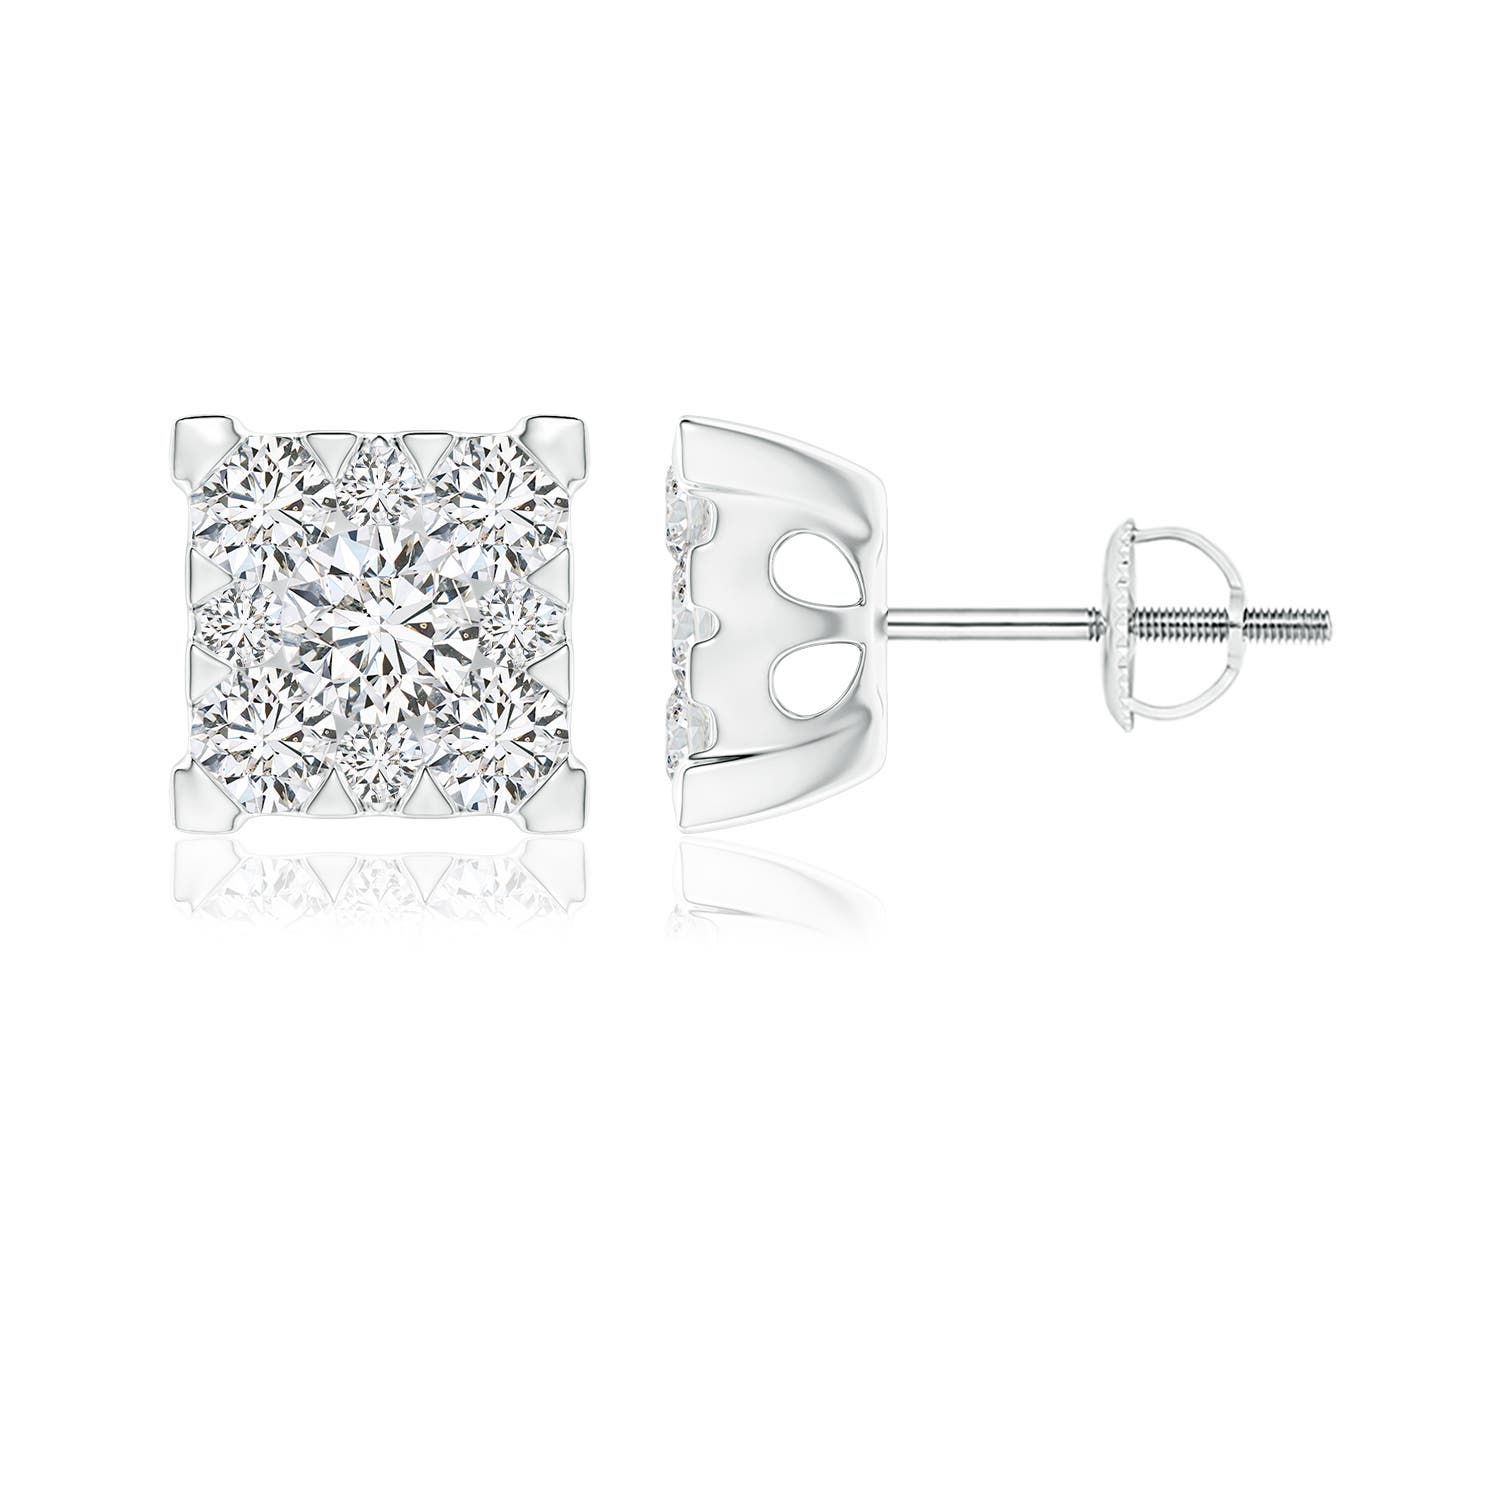 H, SI2 / 1.24 CT / 14 KT White Gold